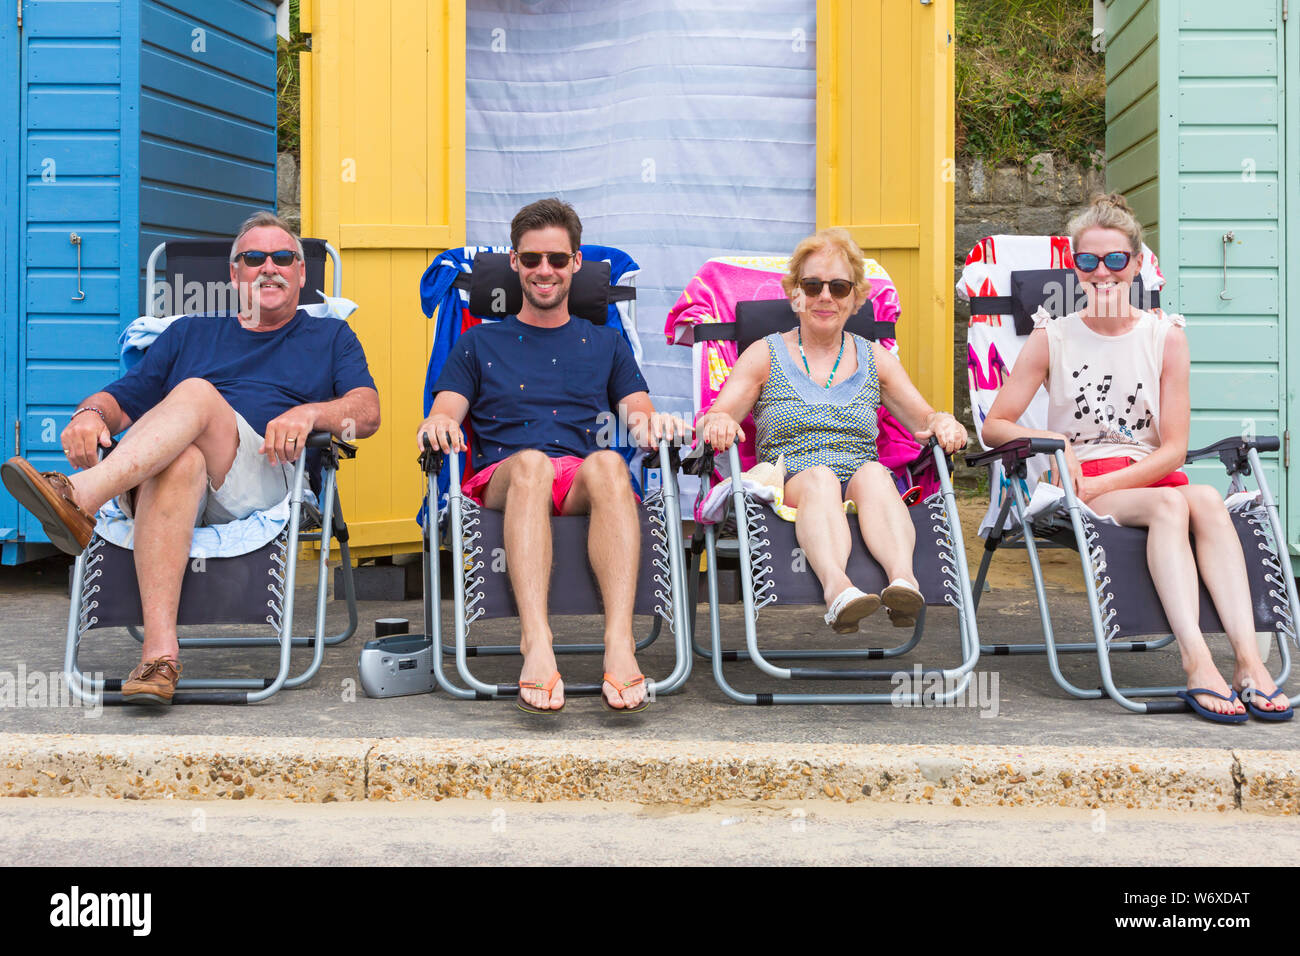 Bournemouth, Dorset UK. 3rd Aug 2019. UK weather: overcast and cloudy, but warm and muggy. Beach goers head to the beaches at Bournemouth to enjoy the warm weather. Four people relaxing in sunloungers on promenade outside beach huts.  Credit: Carolyn Jenkins/Alamy Live News Stock Photo